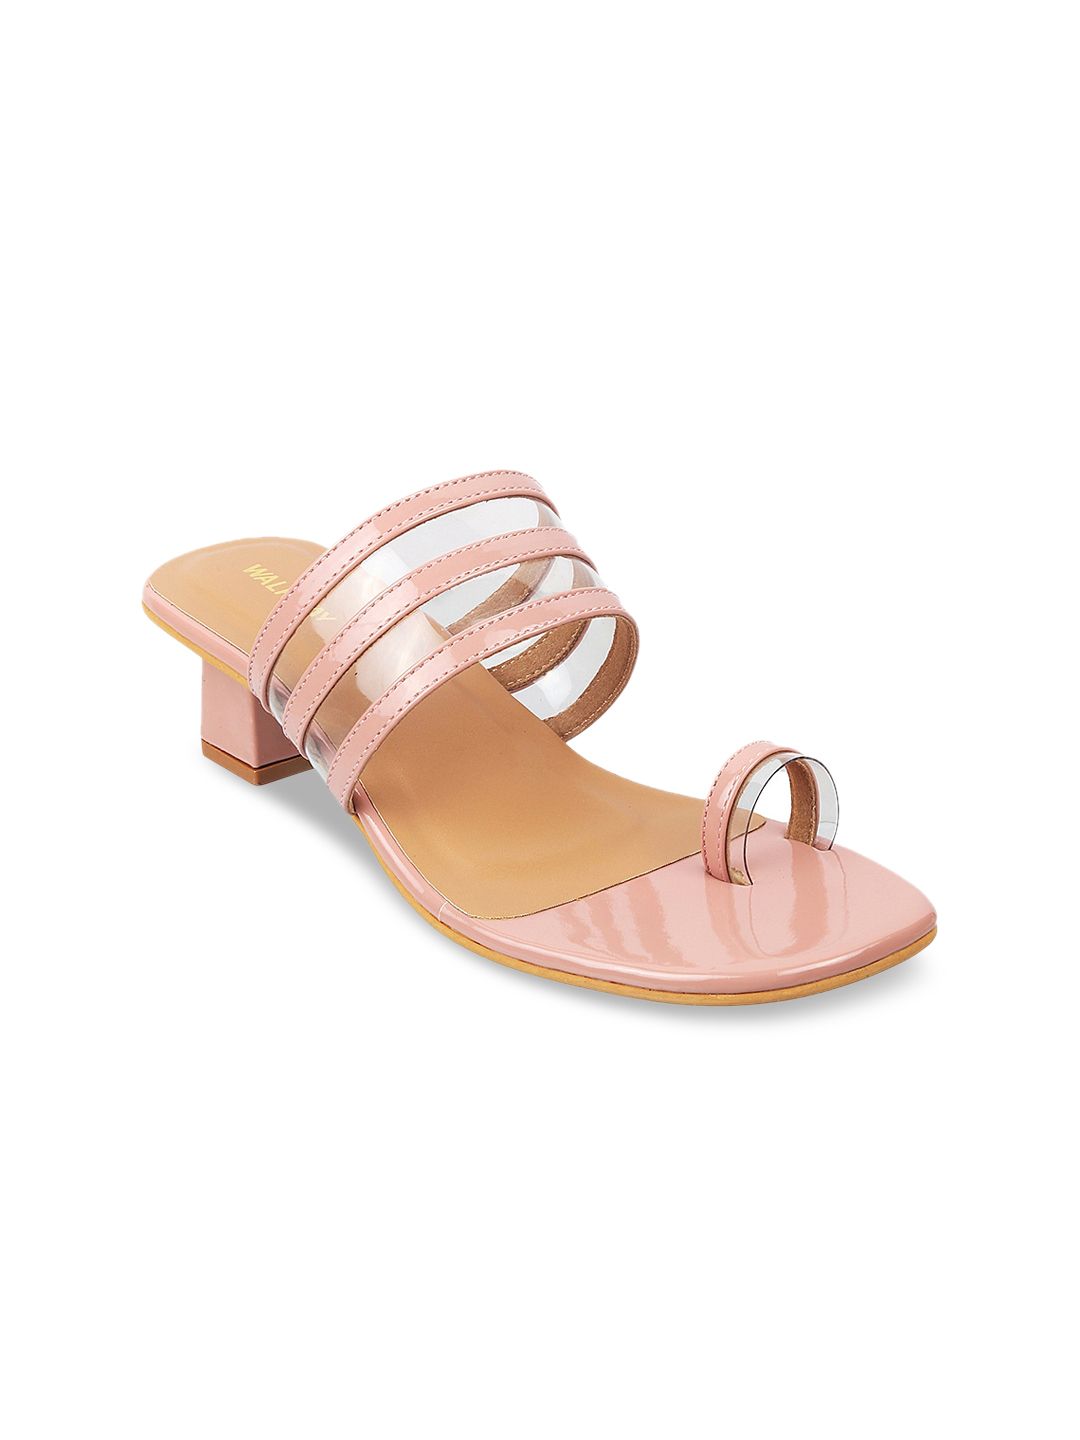 WALKWAY by Metro Peach-Coloured Striped Block Sandals Price in India